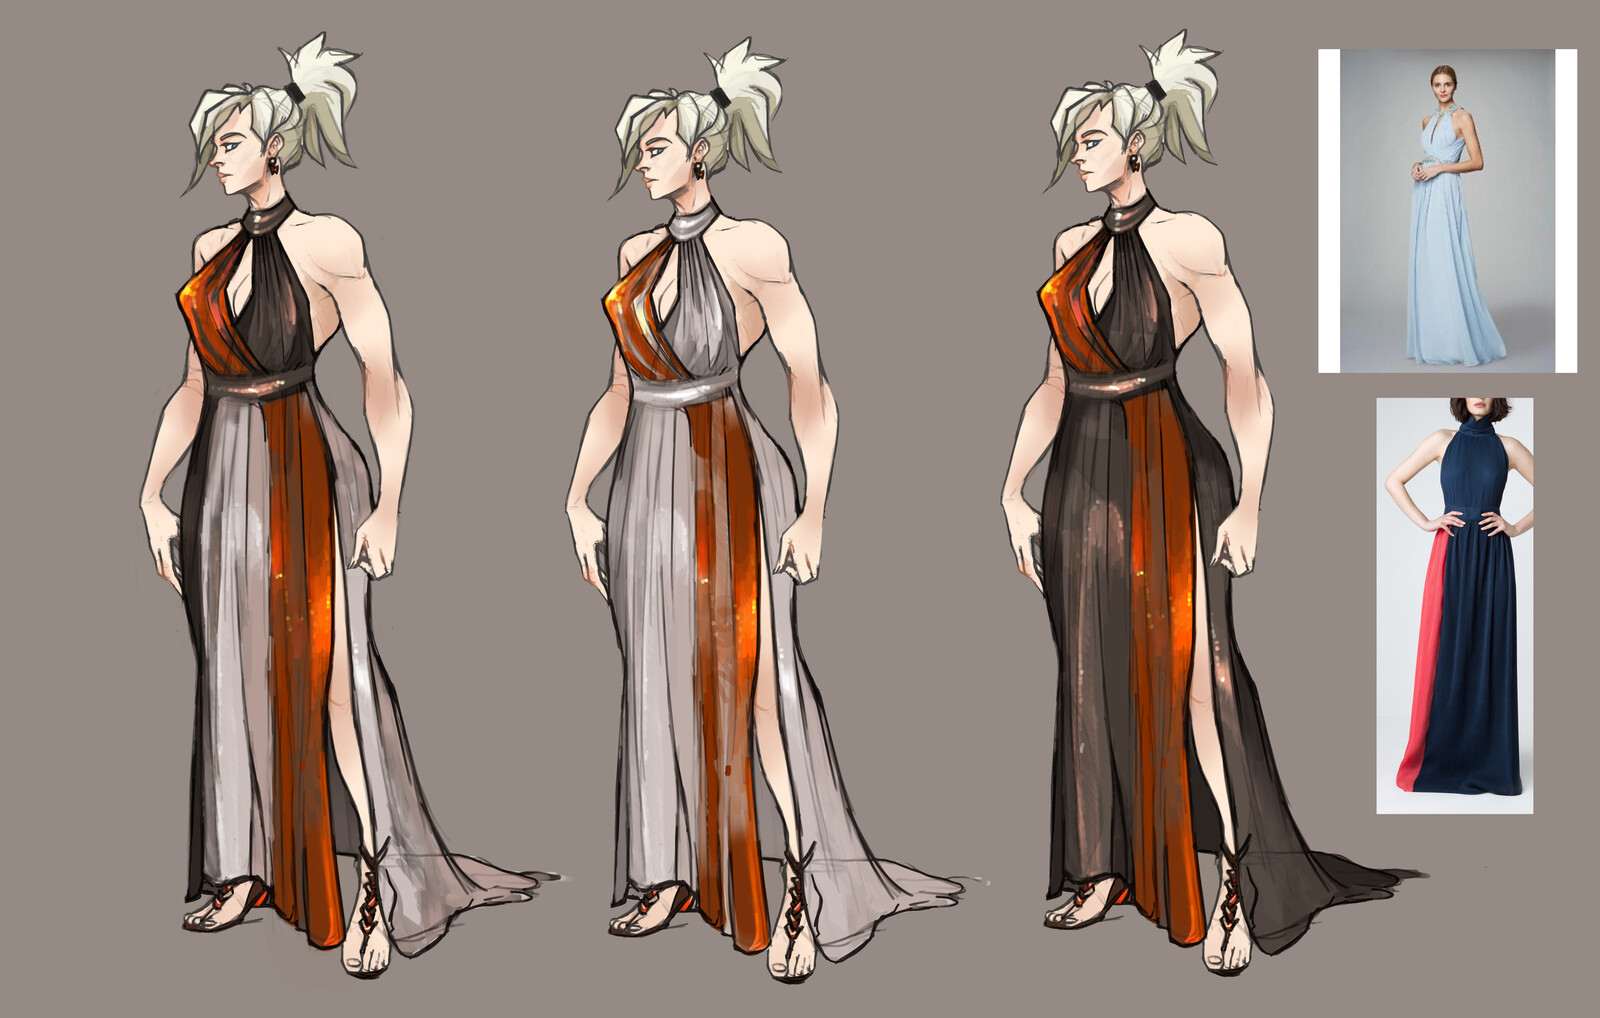 Ideations with research. Chiffon with a bit of shine, I'm also really digging the strips of brighter color.